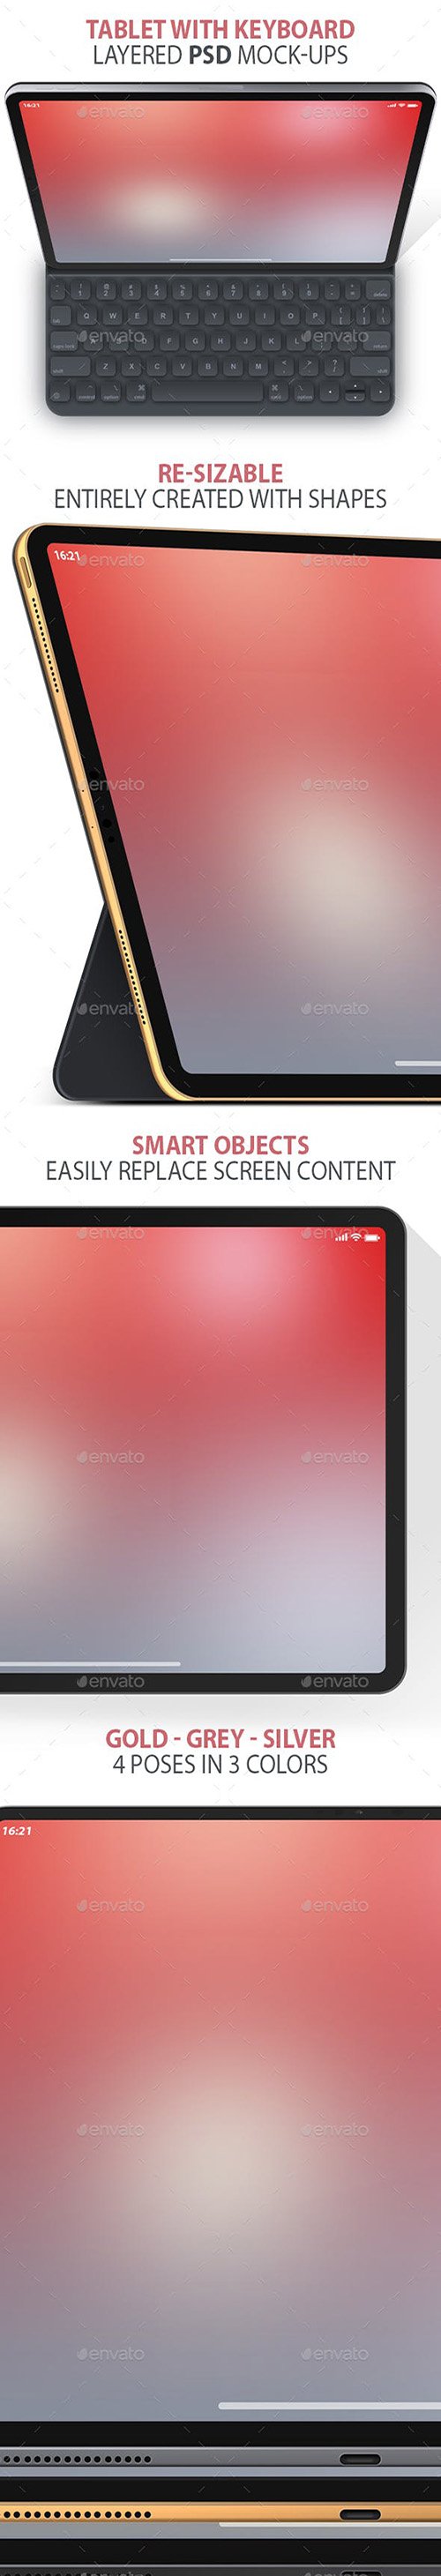 GR - Clean Tablet Layered PSD Mock-ups 23086943